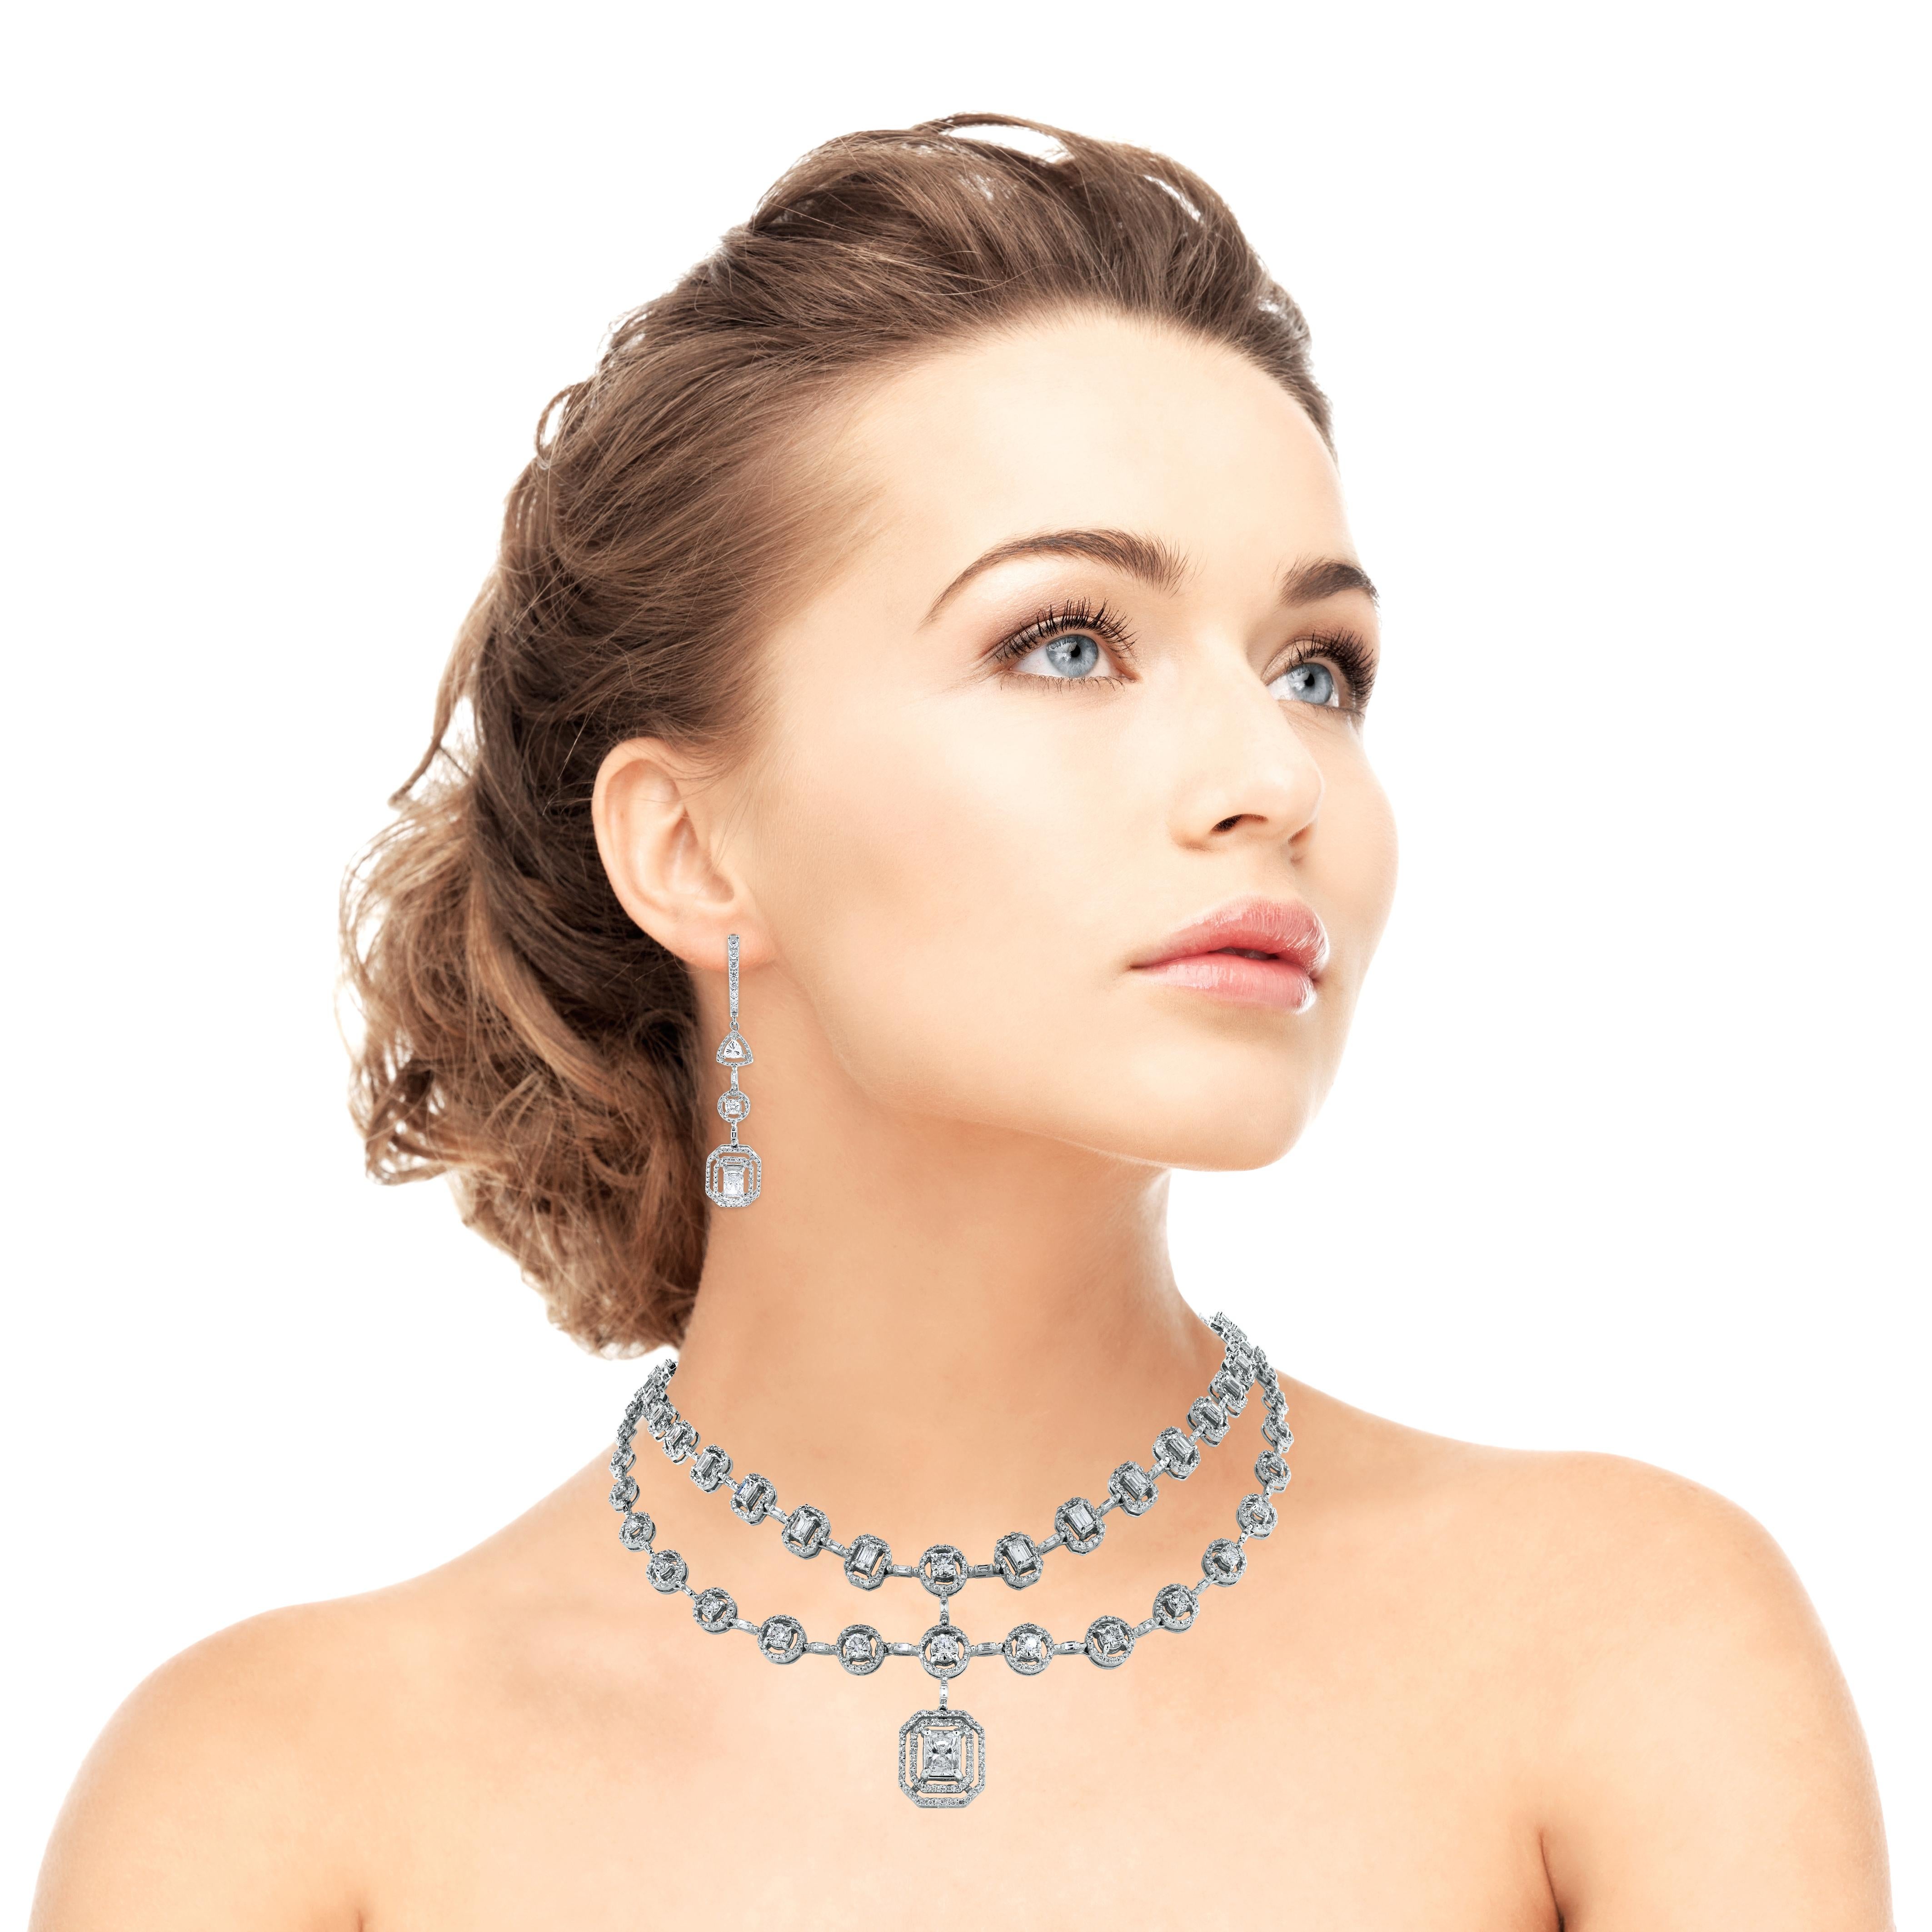 The Beauvince Sansa Diamond Necklace & Earring Suite is delicate and sensual yet bold and enigmatic. The gorgeous double strand necklace features 1.02 Carat Radiant Cut Diamond at it's center. 

Diamonds Shapes: Radiant, Emerald, Baguette & Round